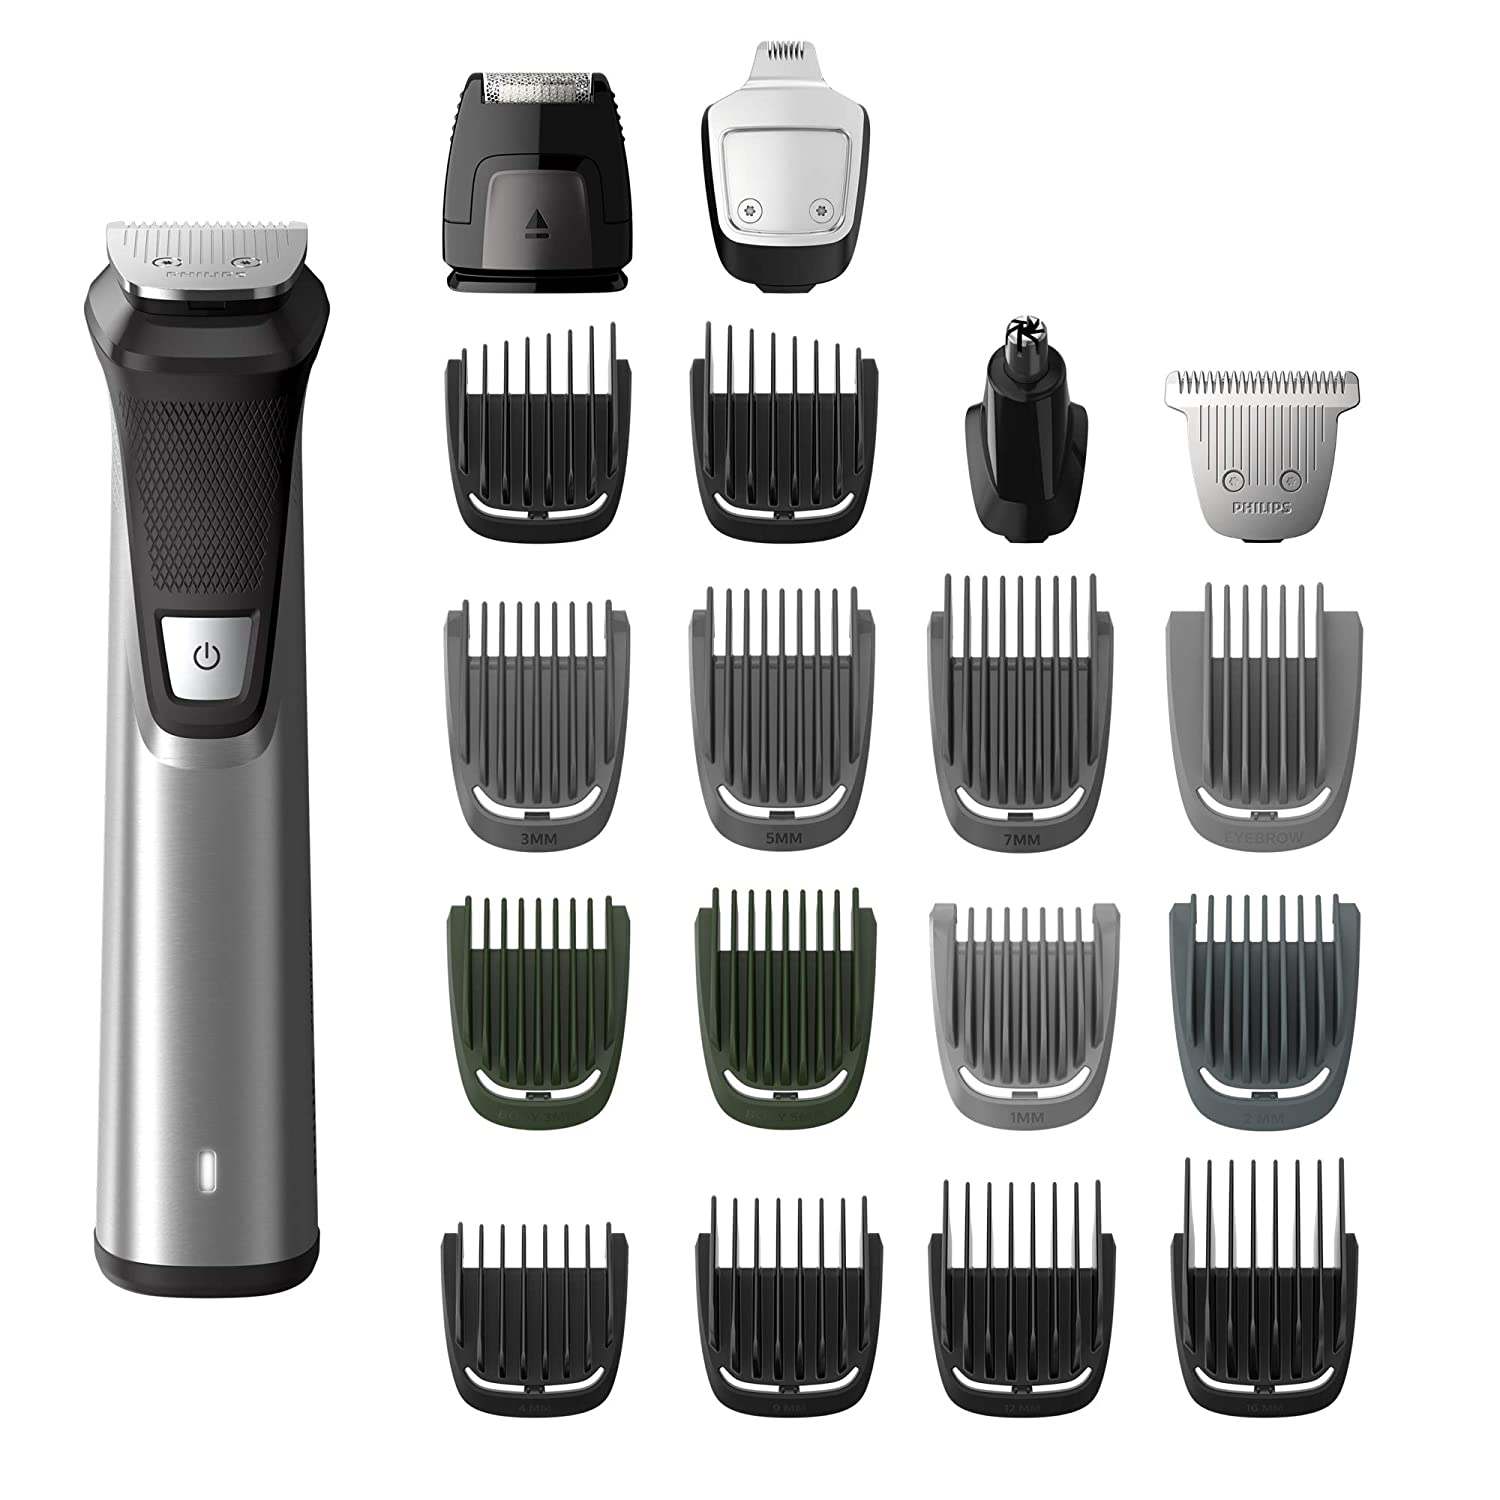 Philips Norelco Multigroomer All-in-One Trimmer Amazon Deal!